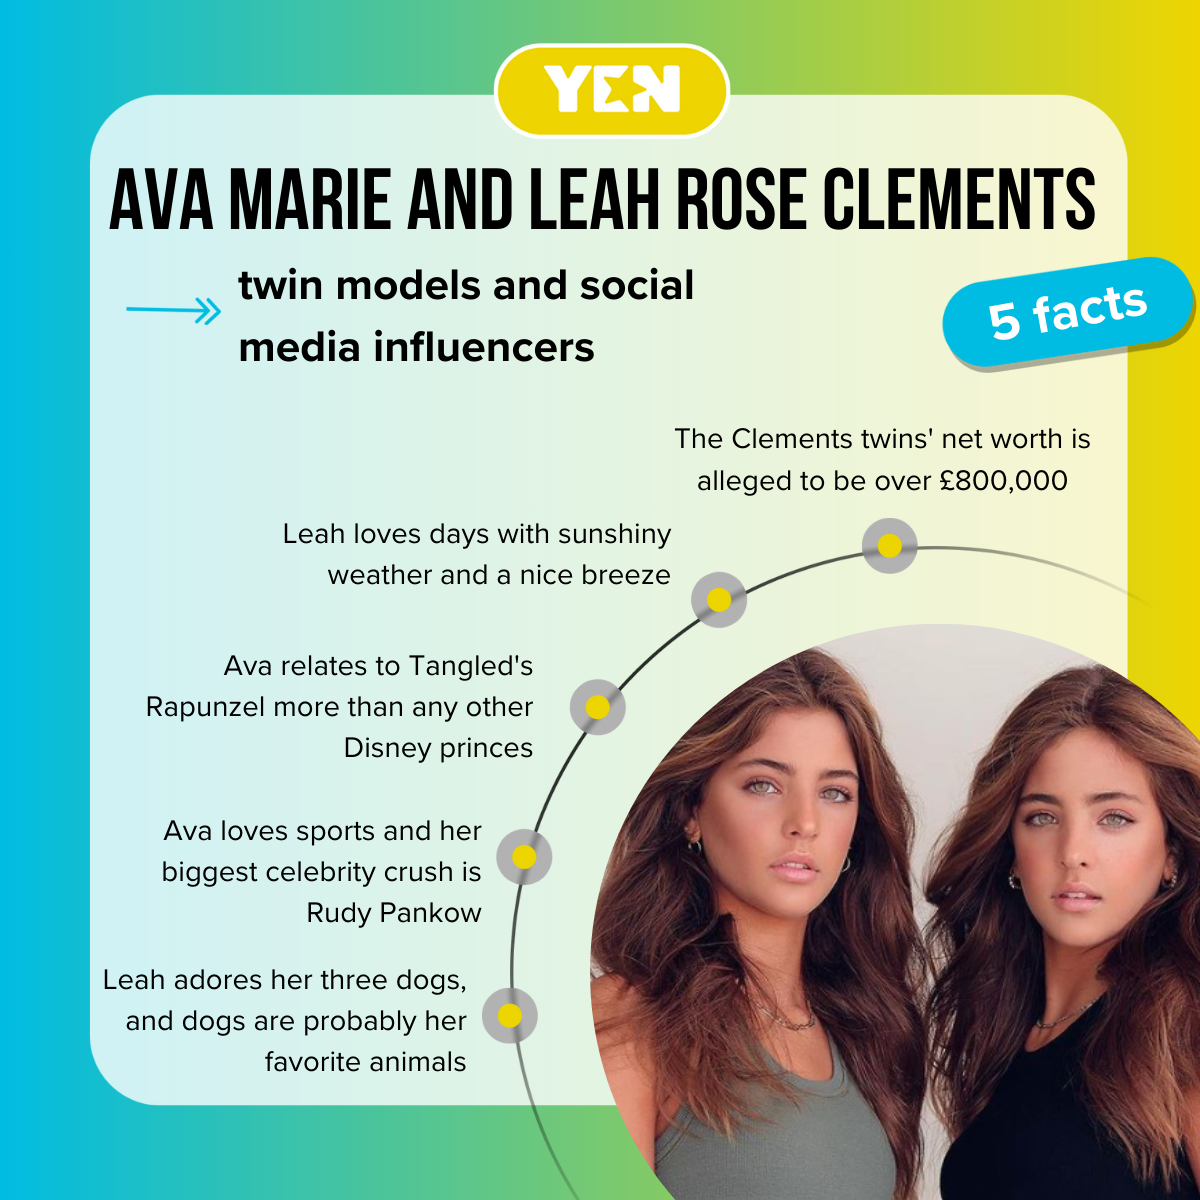 Ava Marie and Leah Rose Clements biography